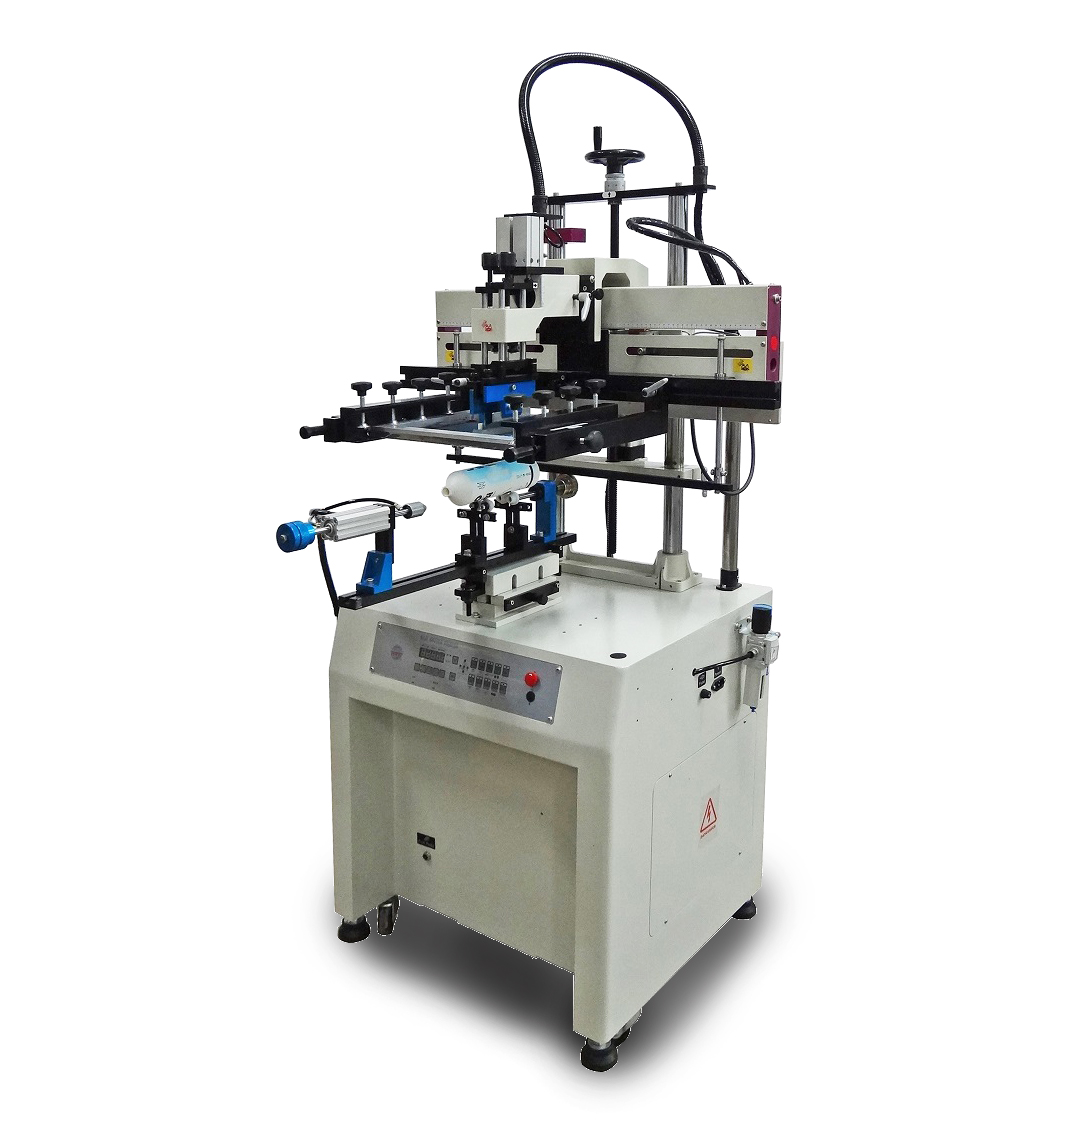 For Cylinderal / Curved Objects Screen Printing Machine